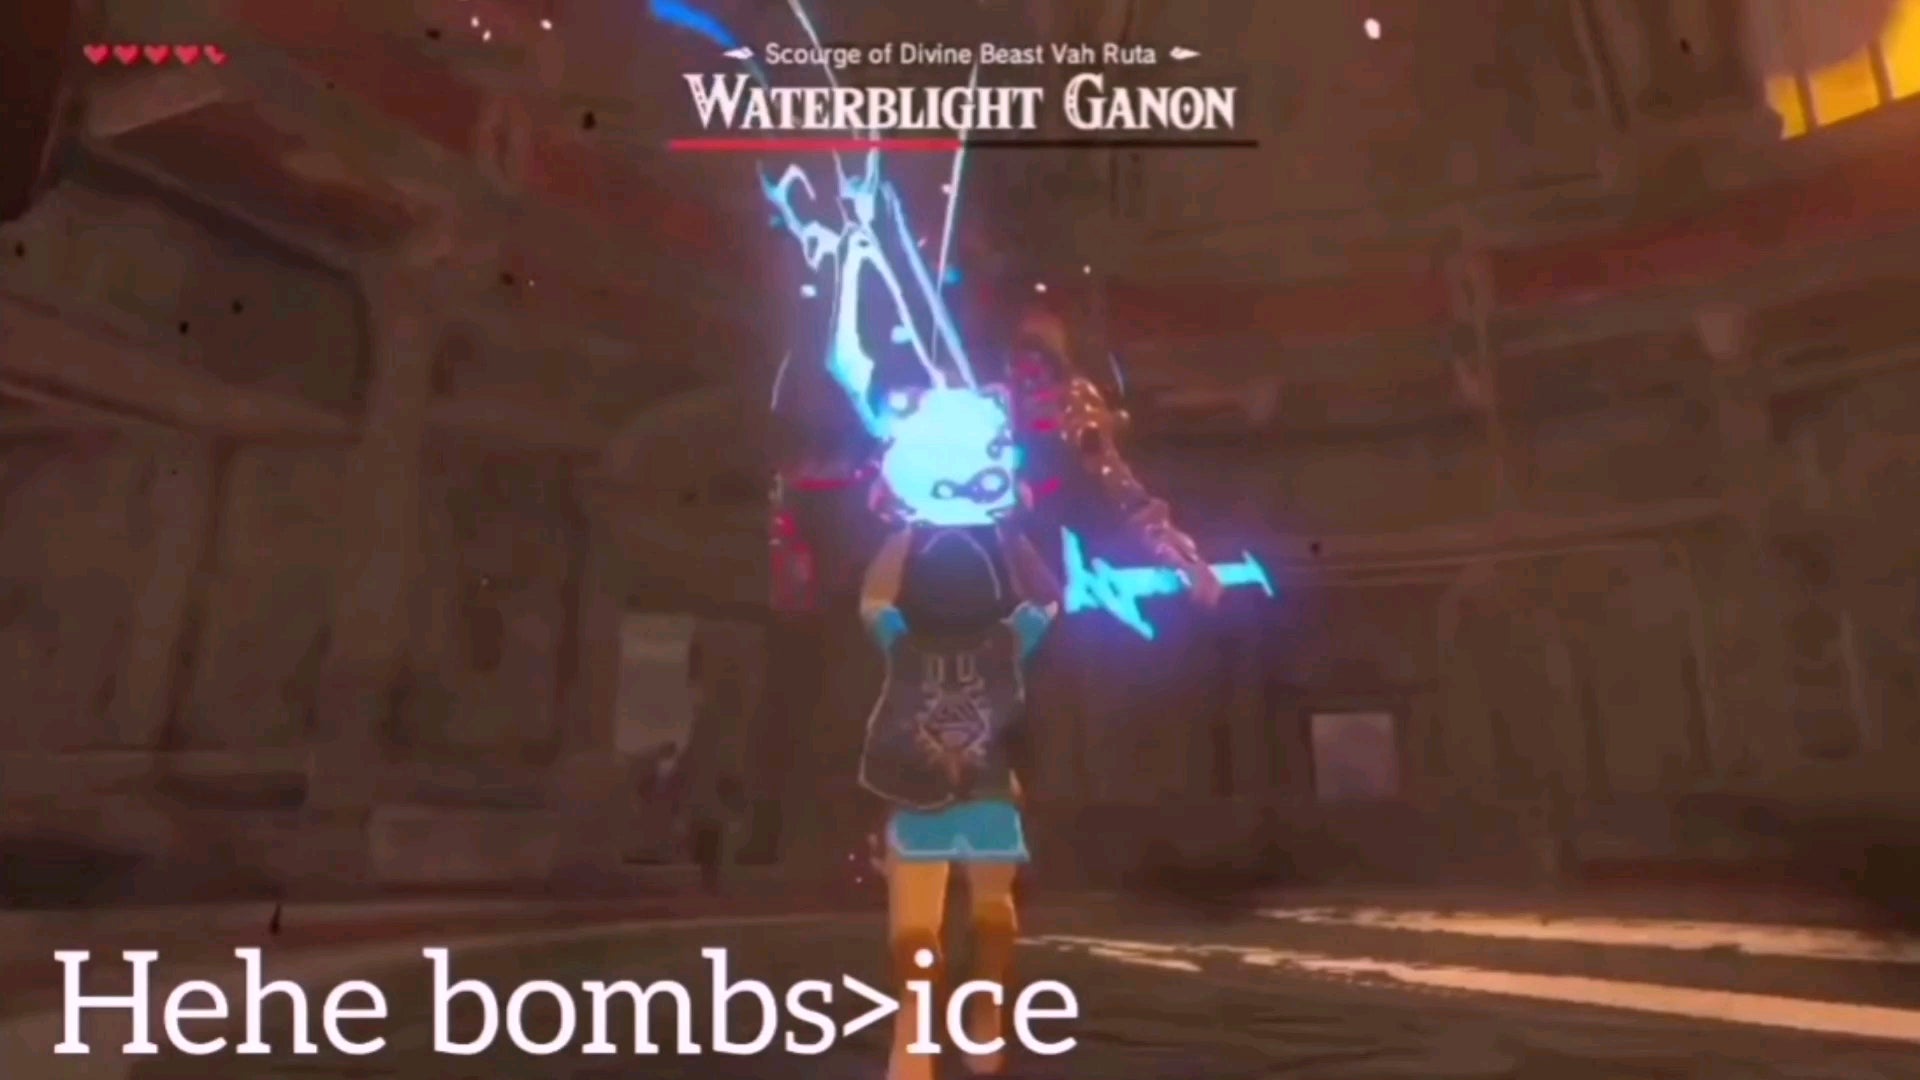 I manged to somehow beat waterblight ganon with only bombs rbreathofthewild